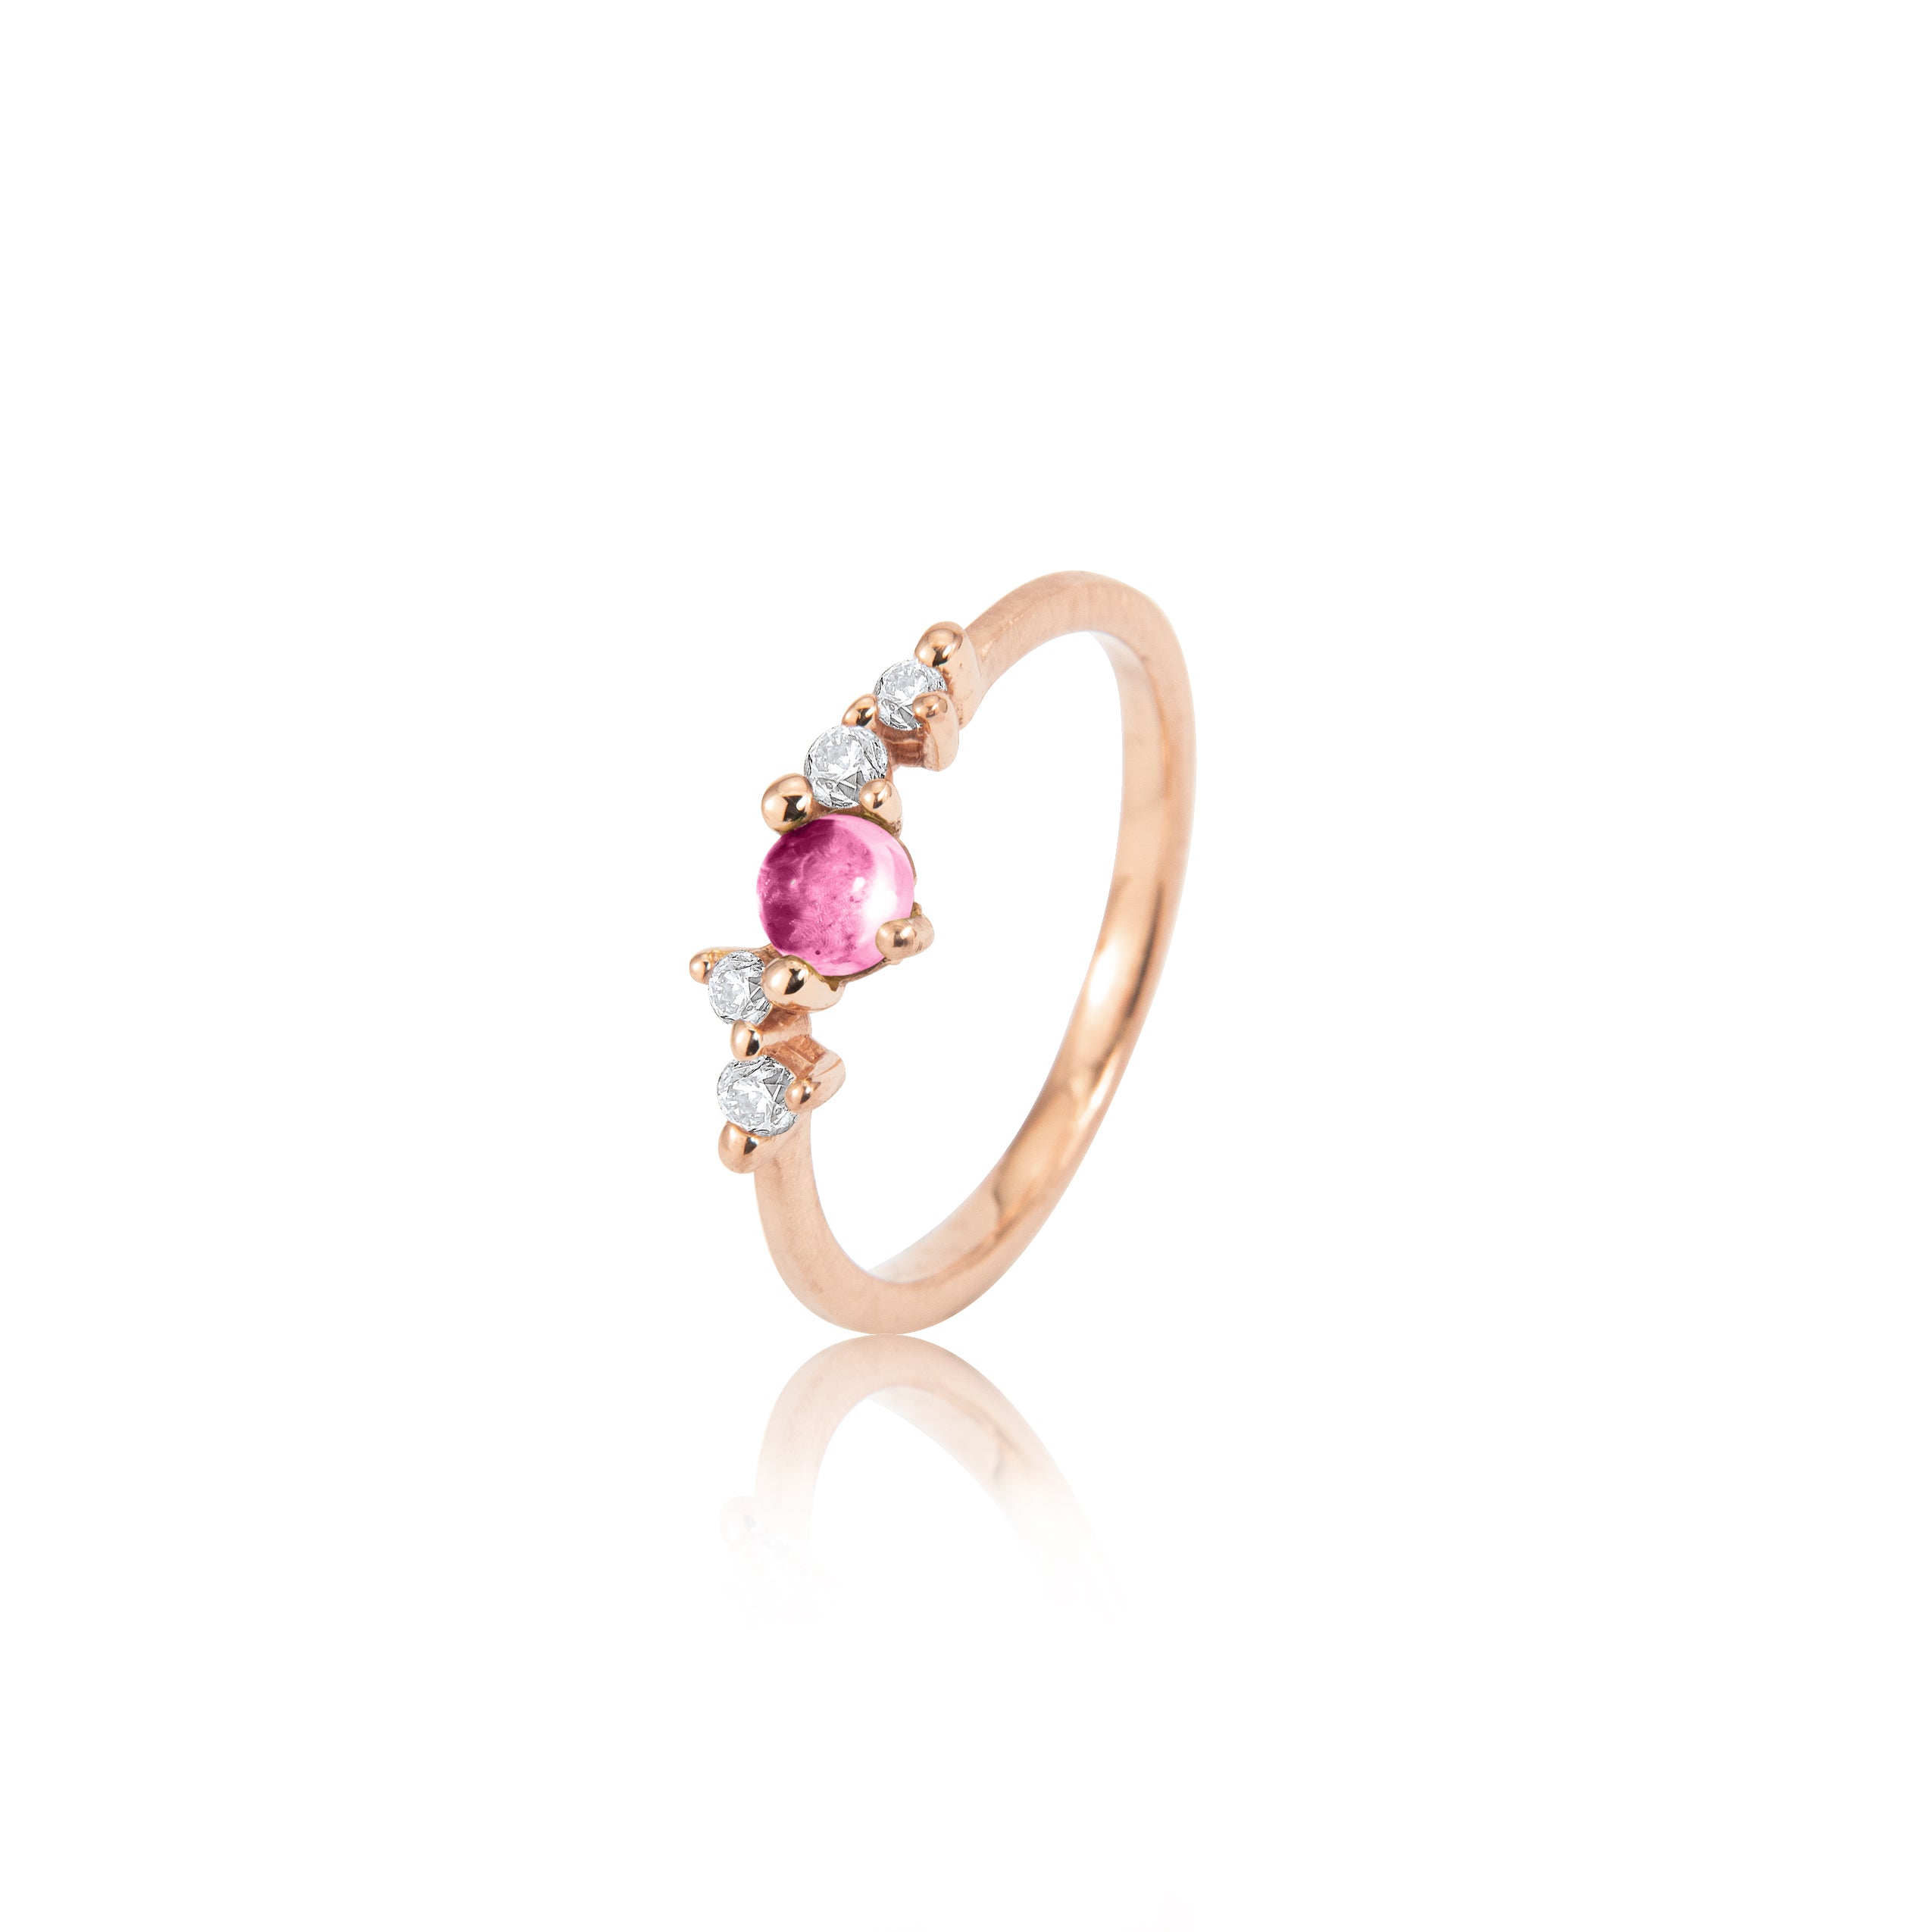 Stellini ring "smal" in 585/- gold with pink tourmaline